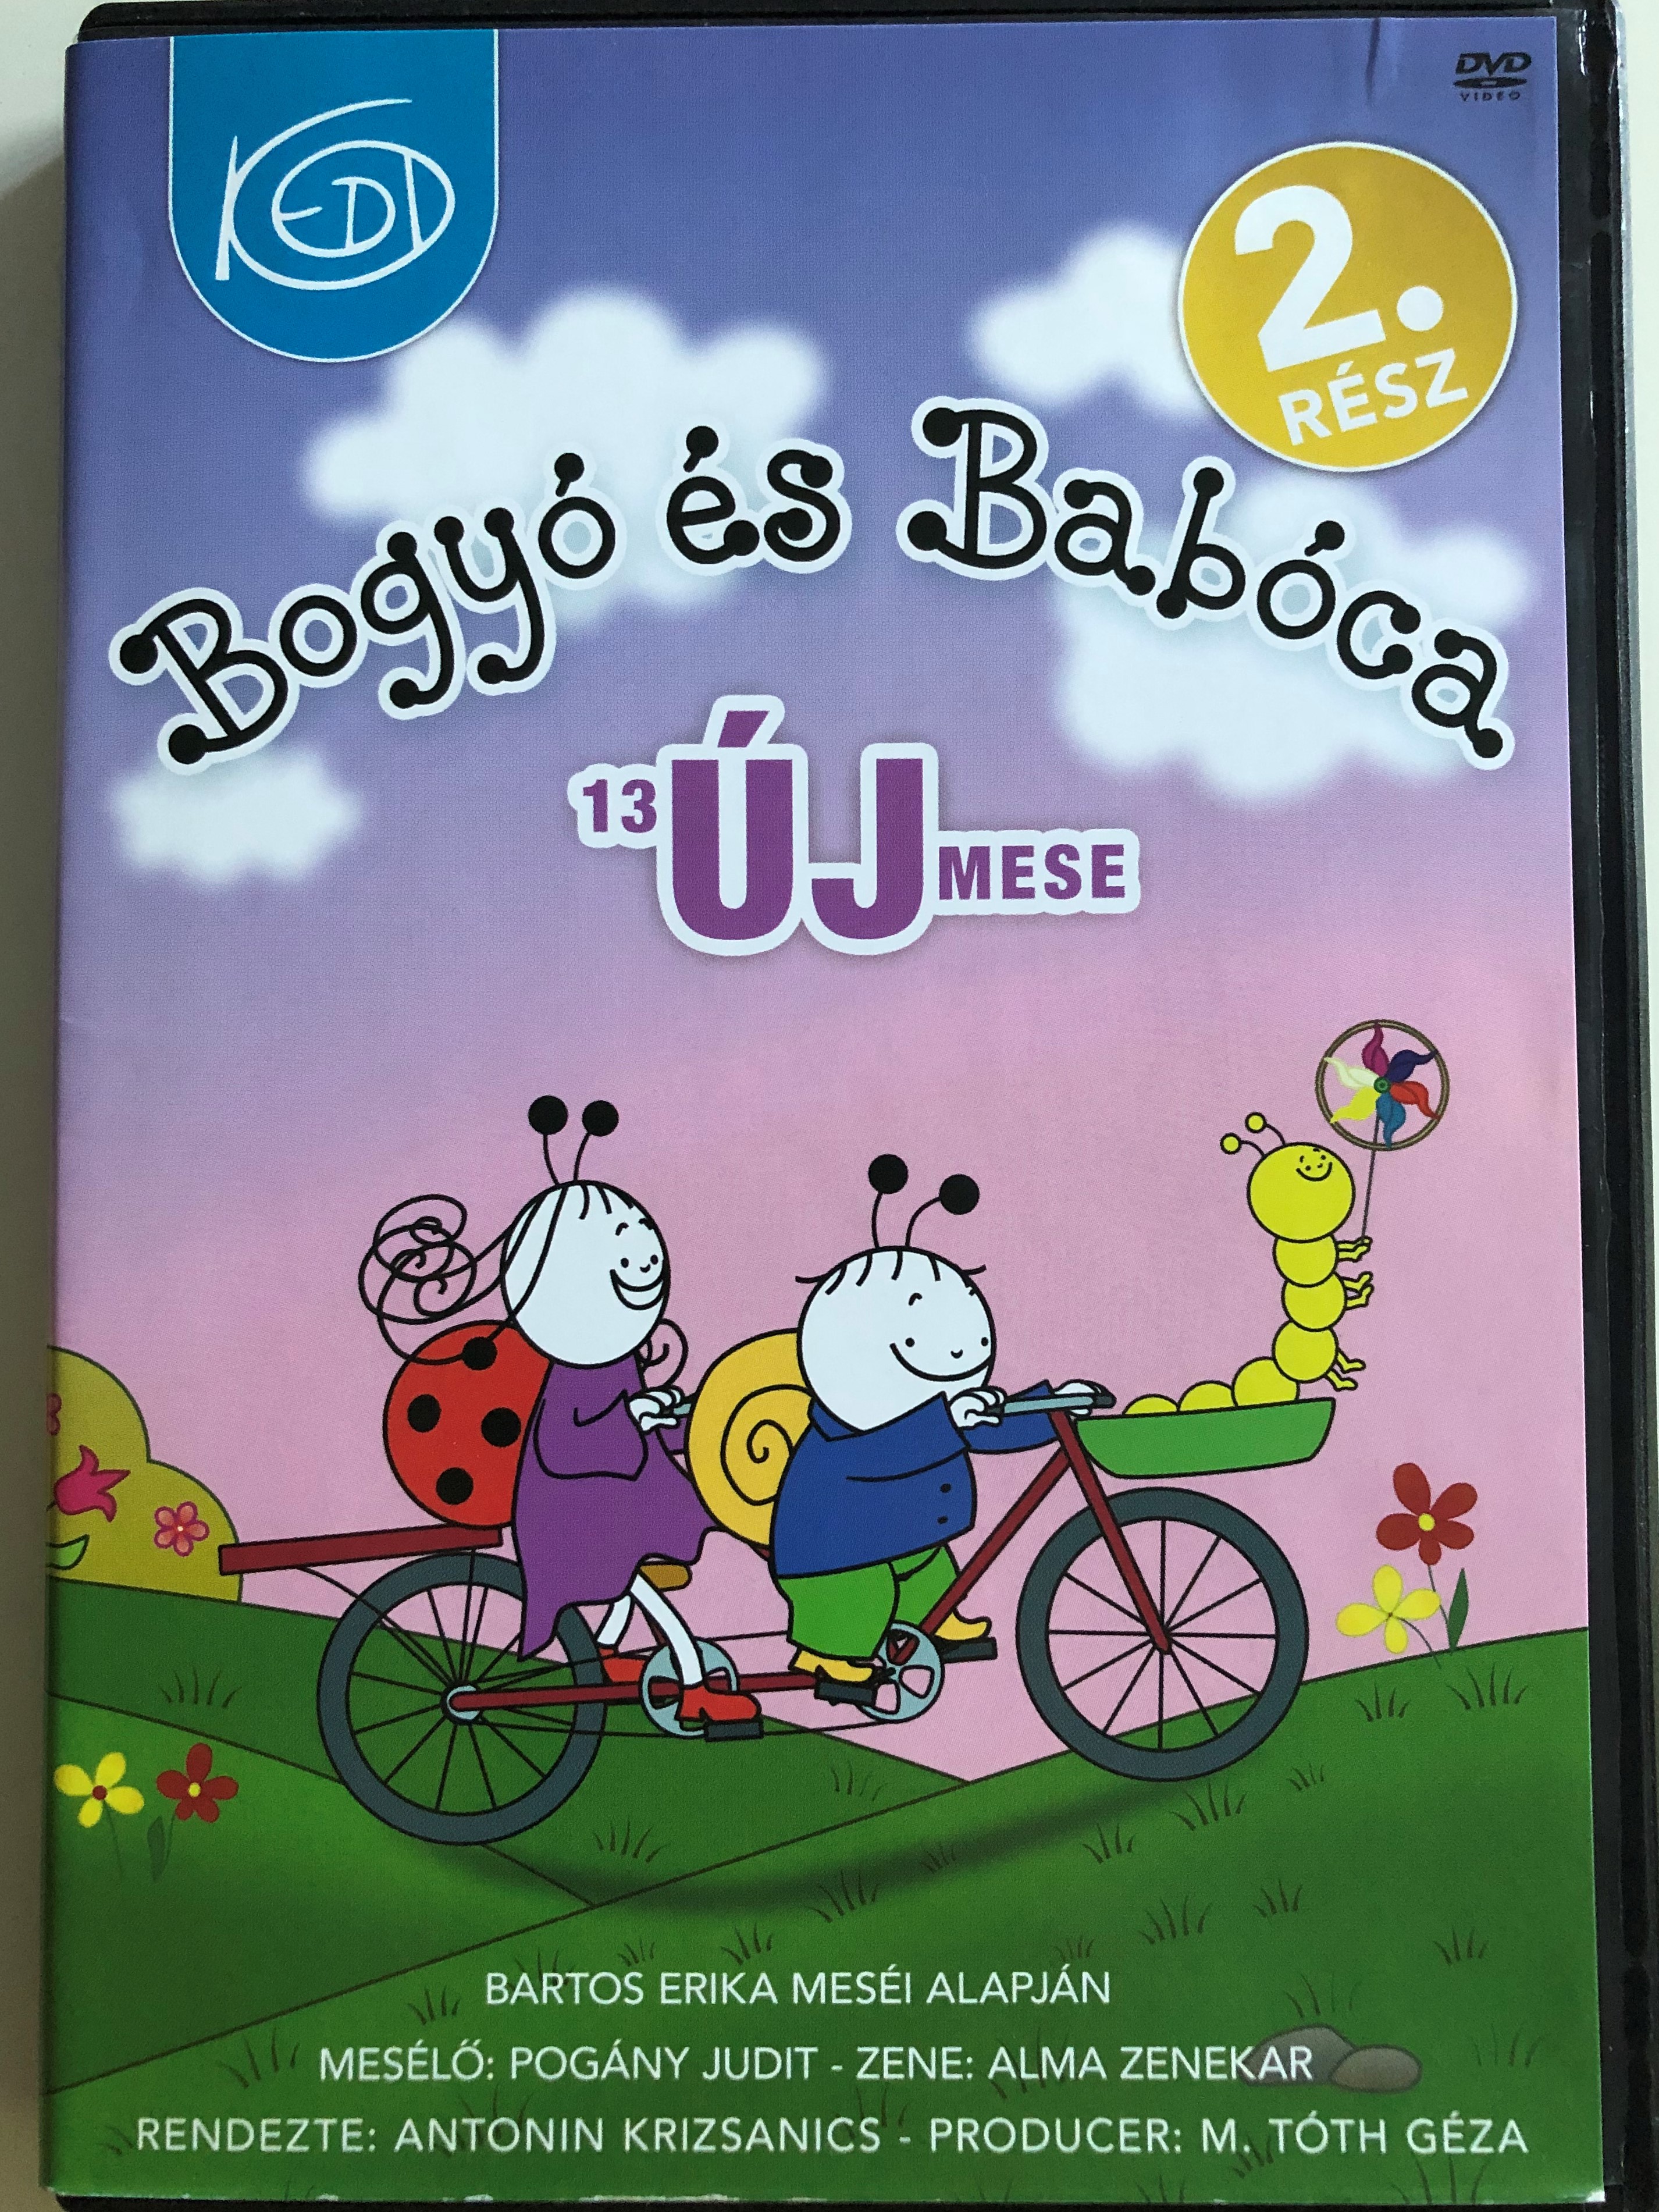 bogy-s-bab-ca-2.-r-sz-dvd-2011-directed-by-antonin-krizsanics-narrated-by-poh-ny-judit-13-j-mese-13-new-hungarian-stories-for-children-1-.jpg